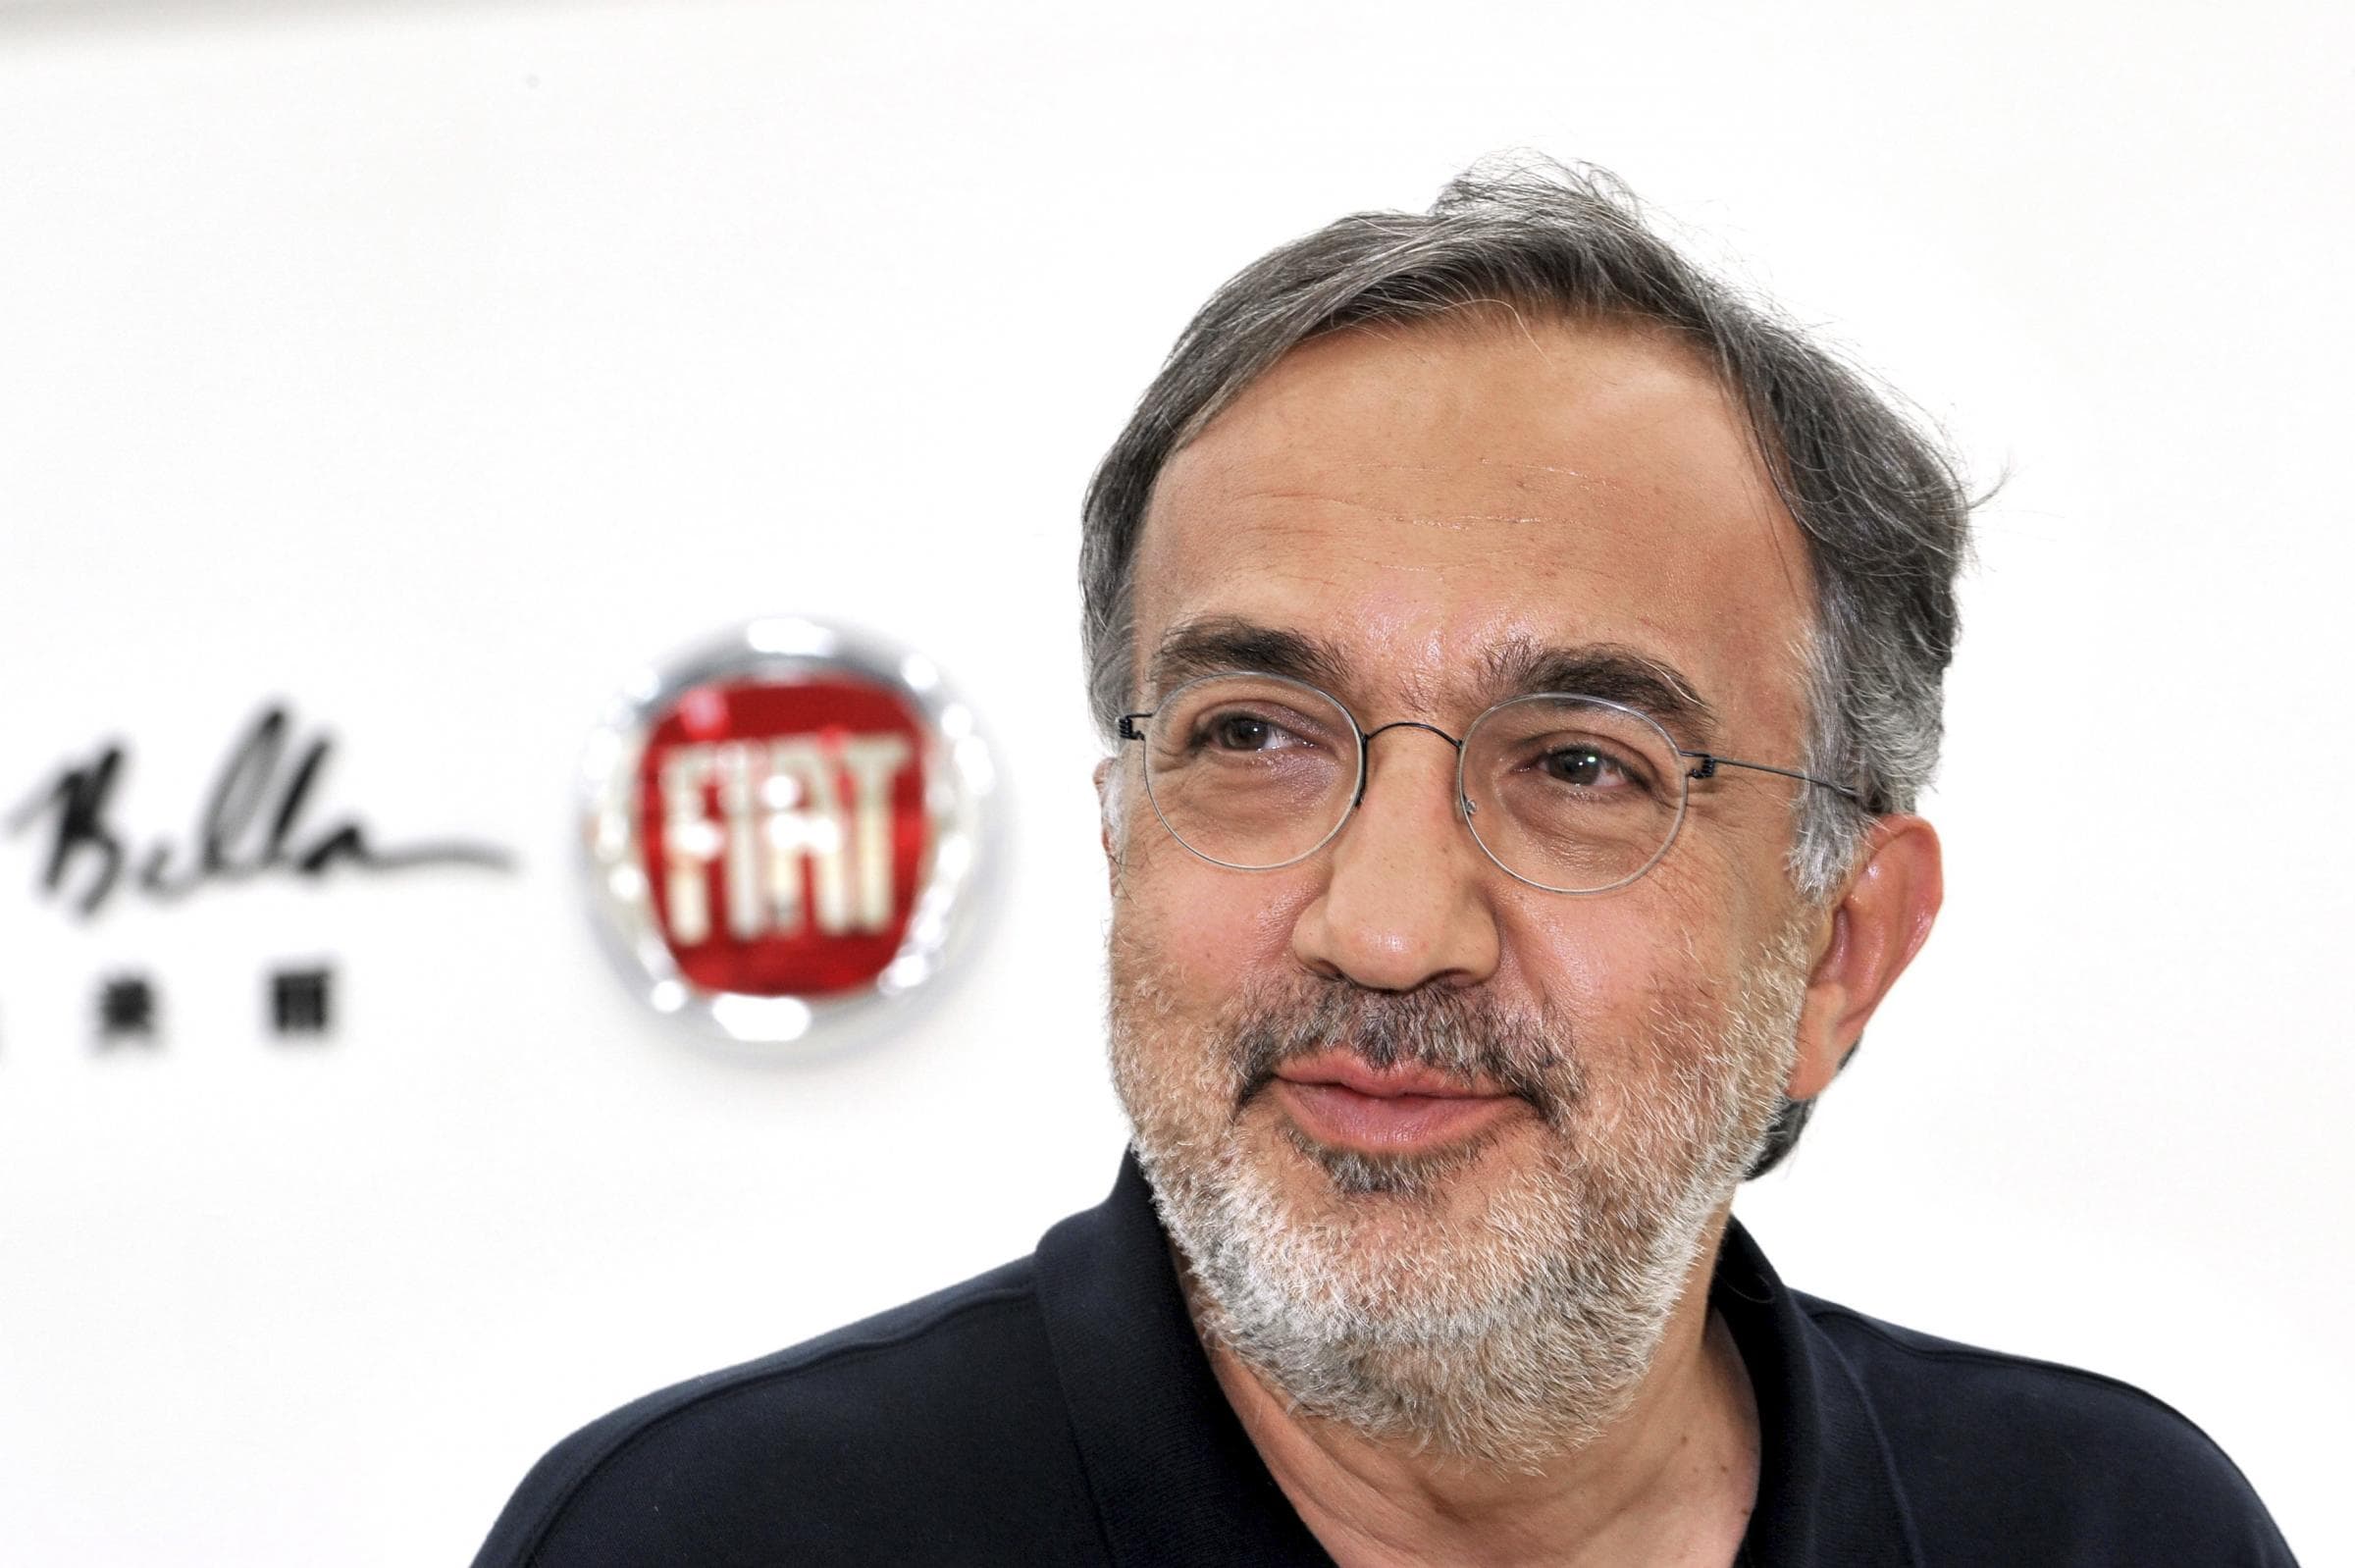 FCA CEO Sergio Marchionne Plans On Replacing Diesel Fiats With Hybrid Models